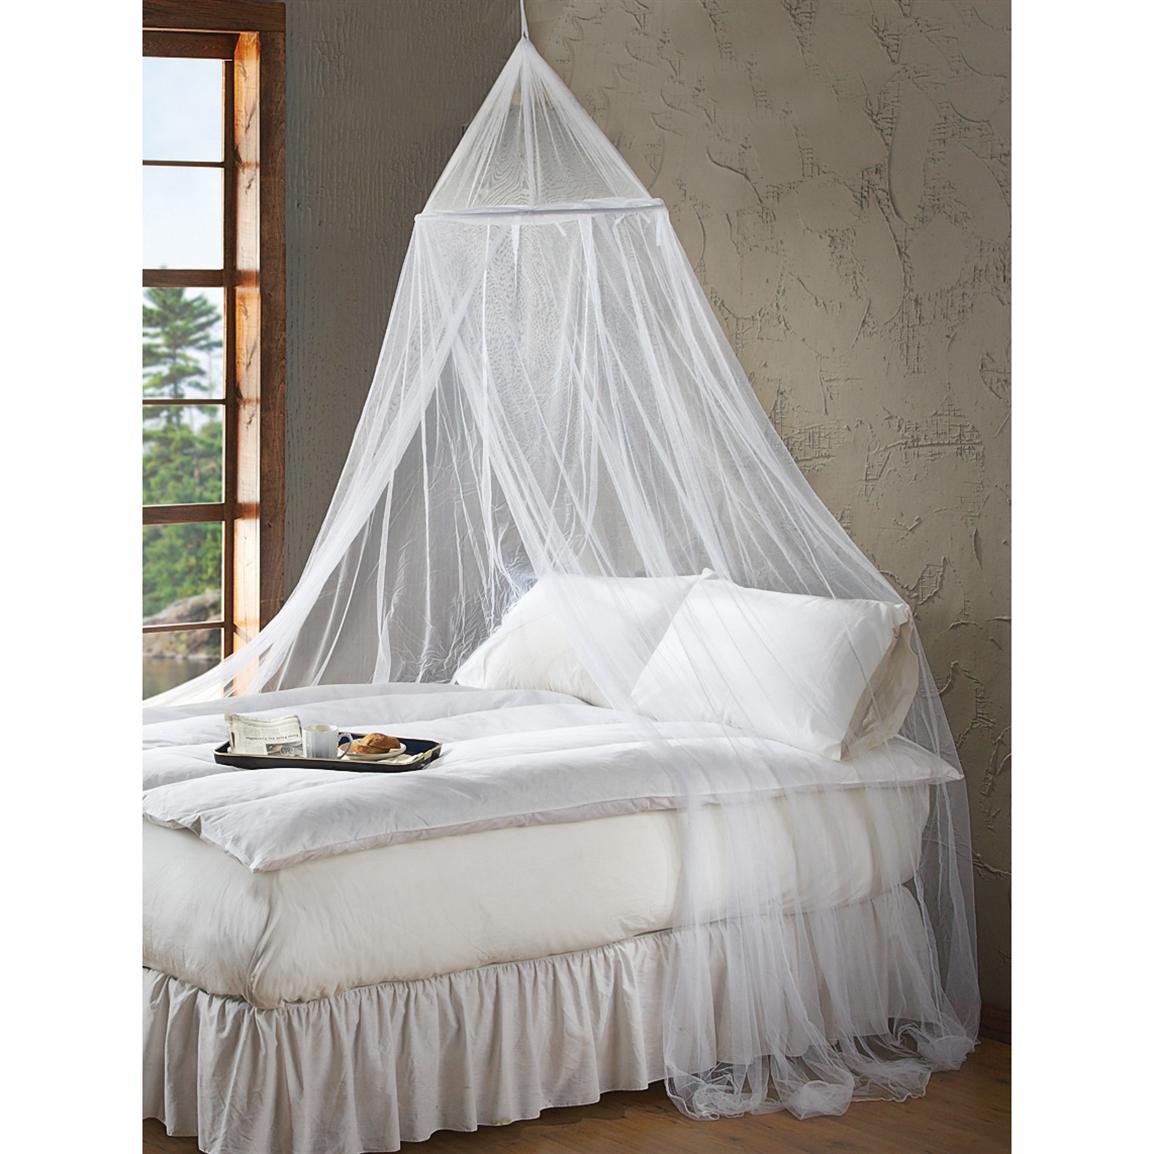 Romantic Bed Canopy - 164479, Bedding Accessories at Sportsman's Guide